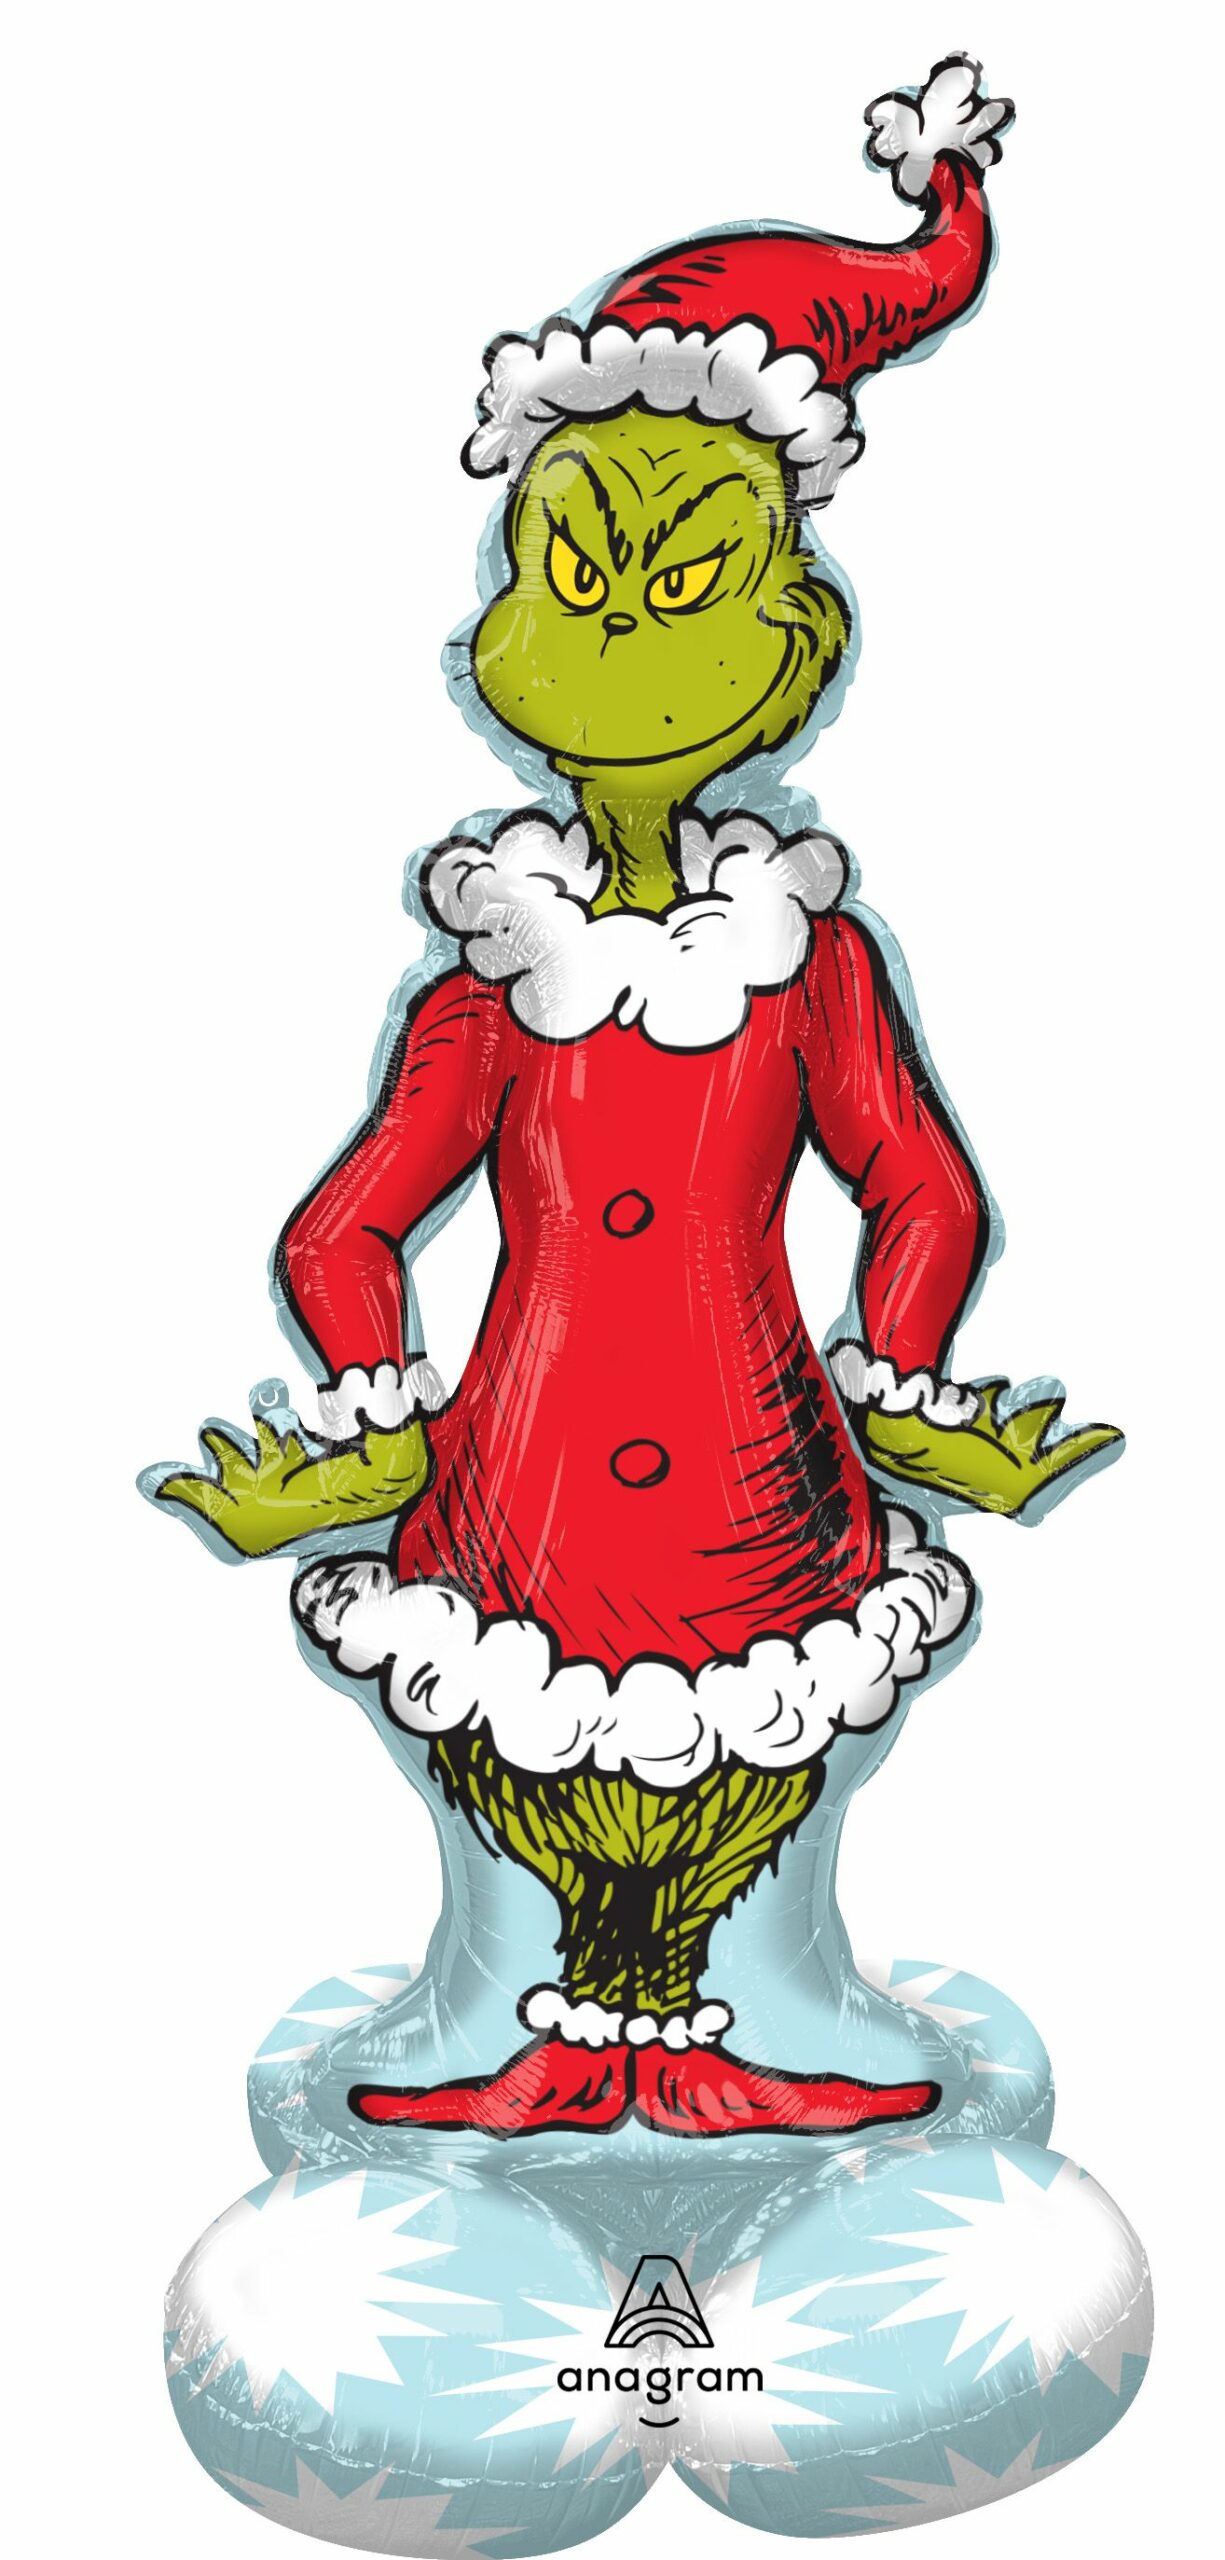 59” The Grinch Air Filled Decorative Balloon